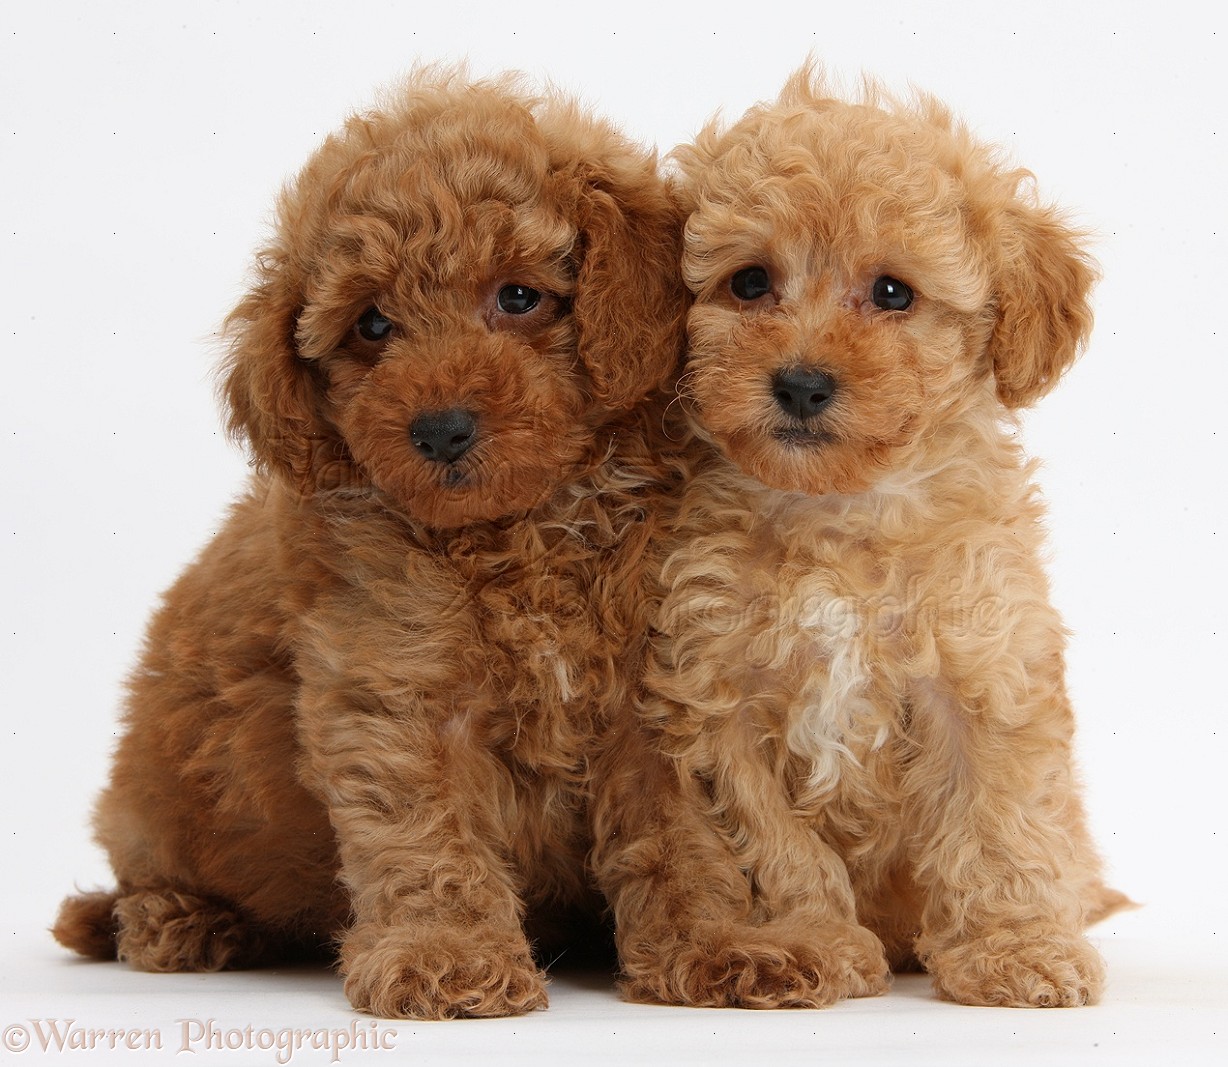 Dogs: Two cute red Toy Poodle puppies photo WP39329